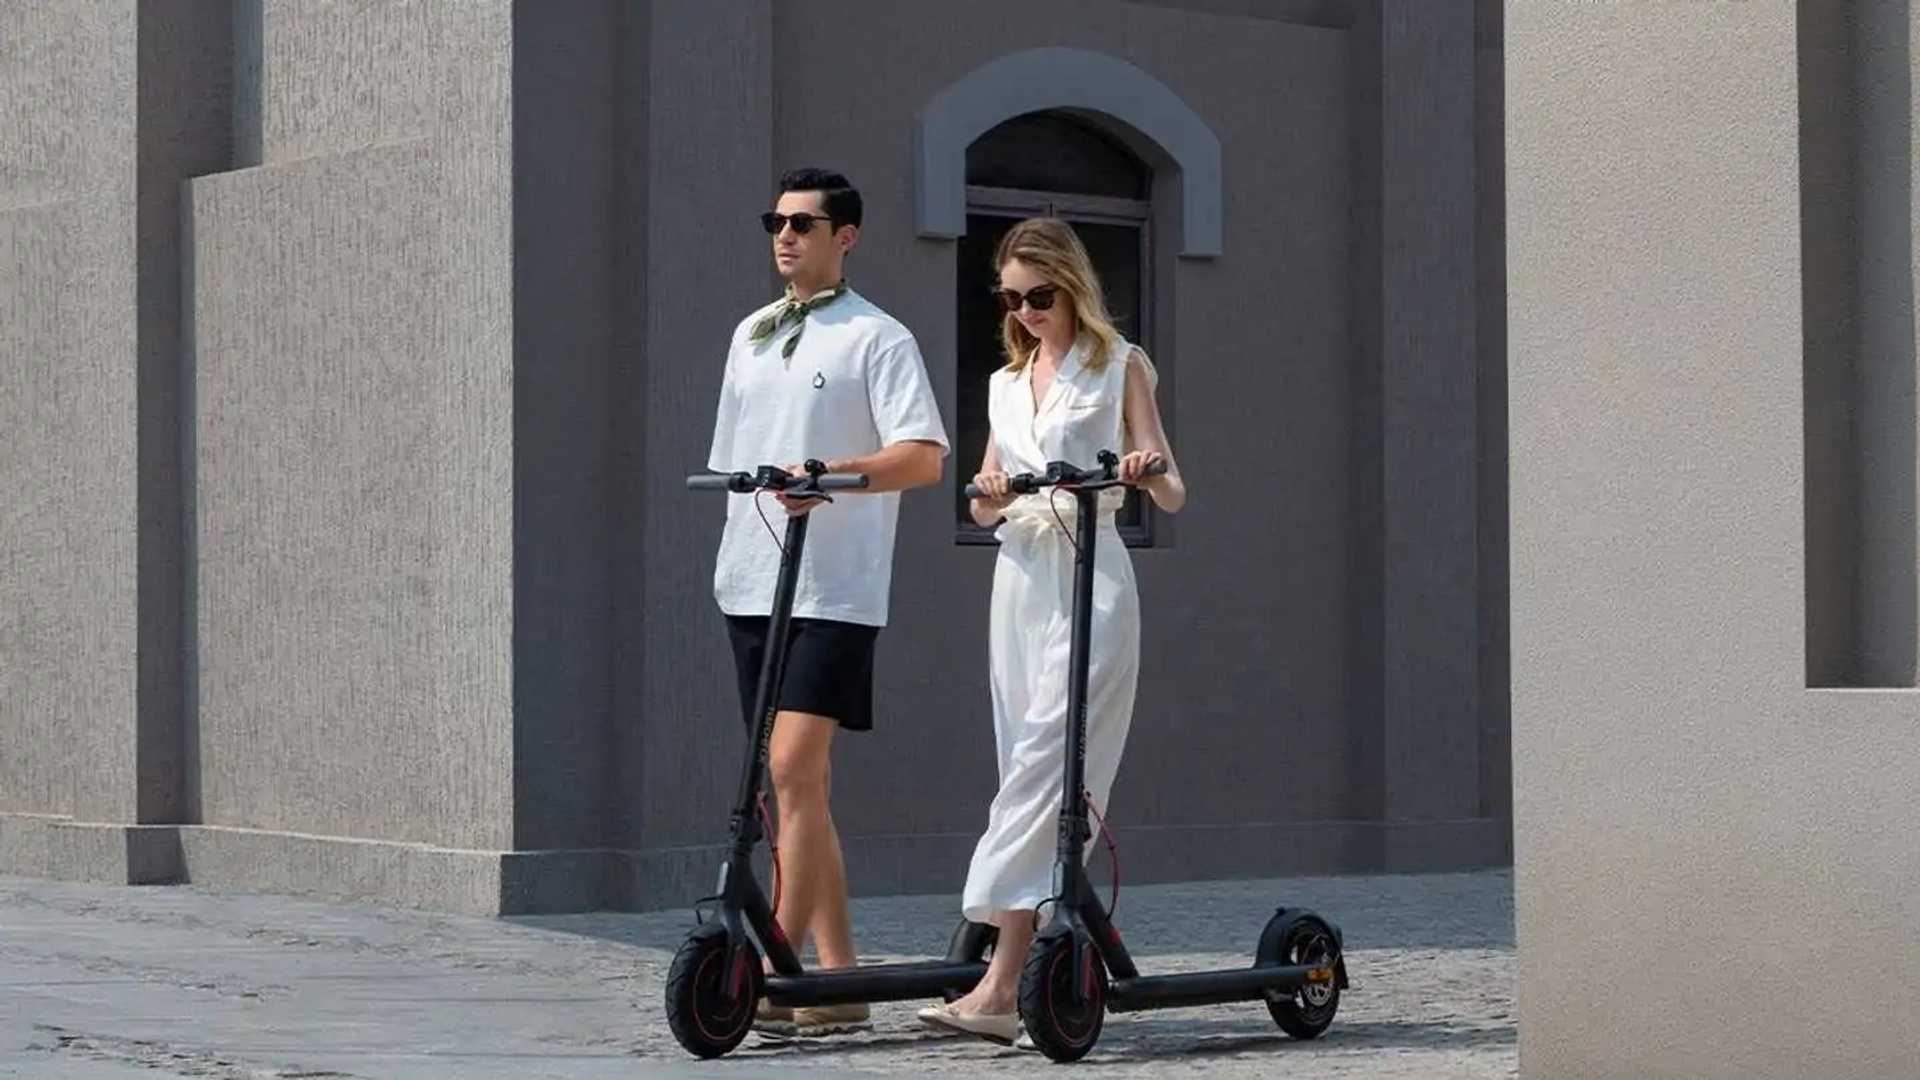 xiaomi-updates-its-e-mobility-range-with-new-electric-scooter-4-pro.jpg